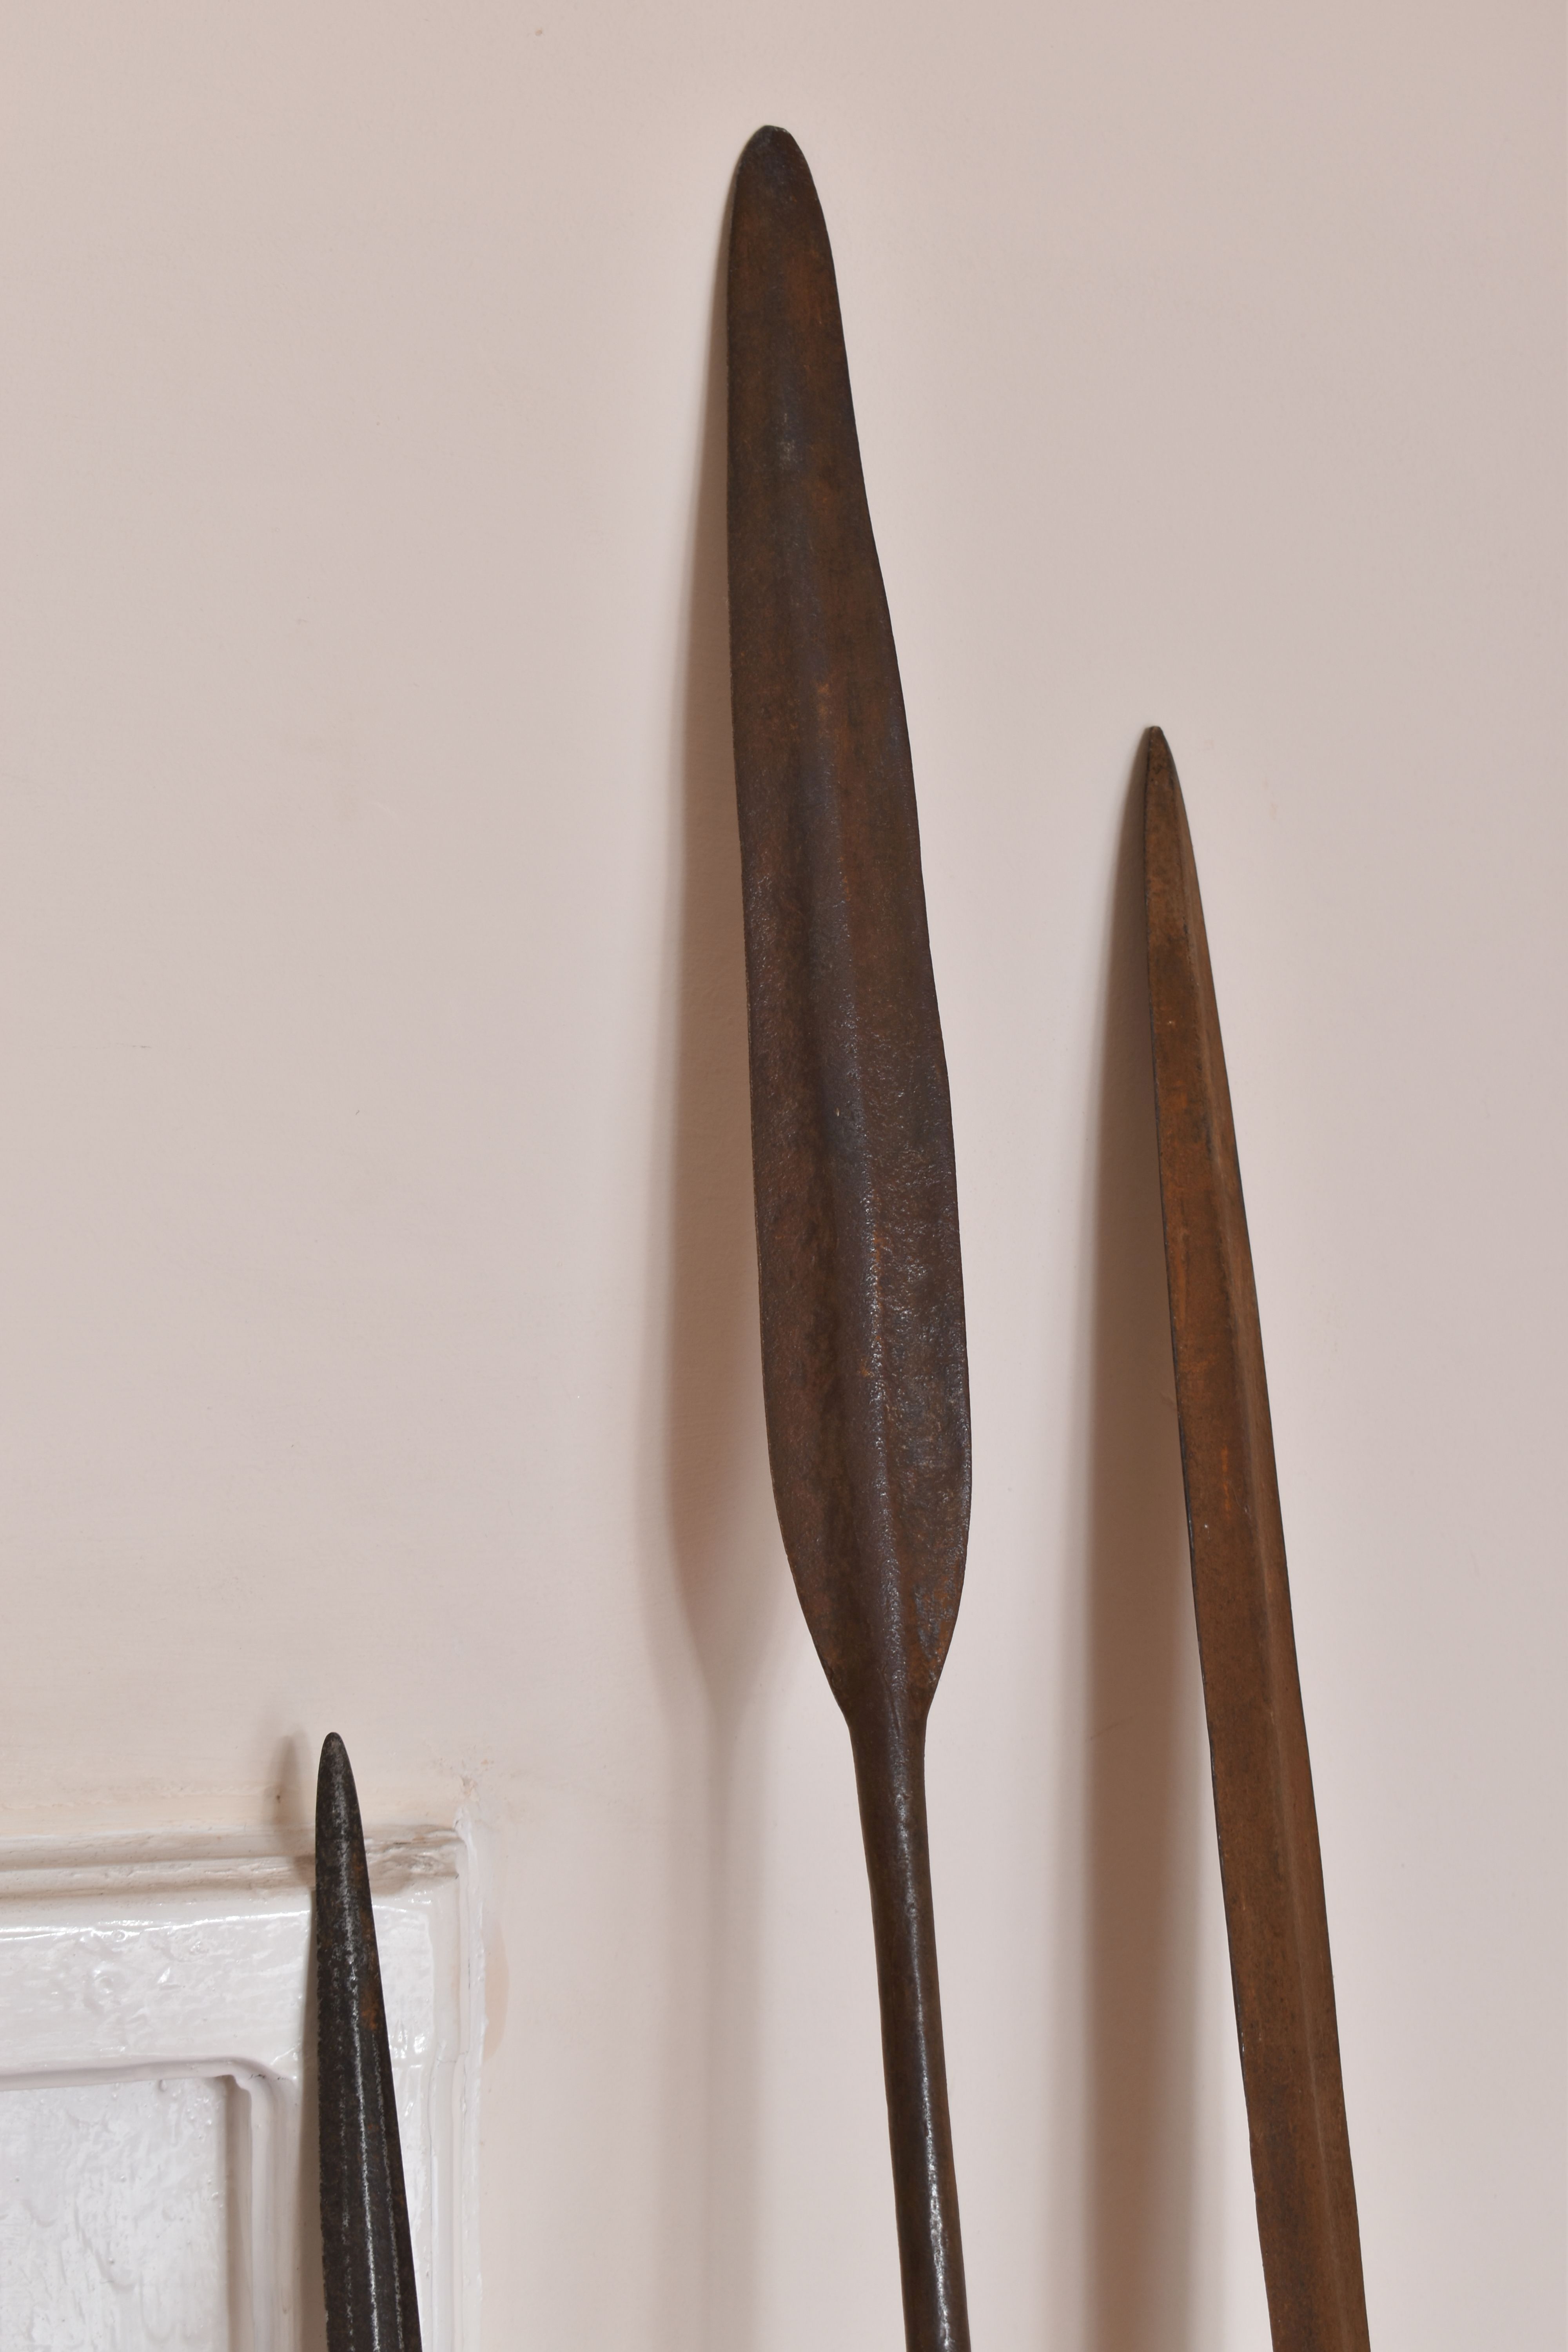 THREE TRIBAL HUNTING SPEARS, the first features a wooden shaft and a grooved arrow shaped steel tip, - Image 3 of 9